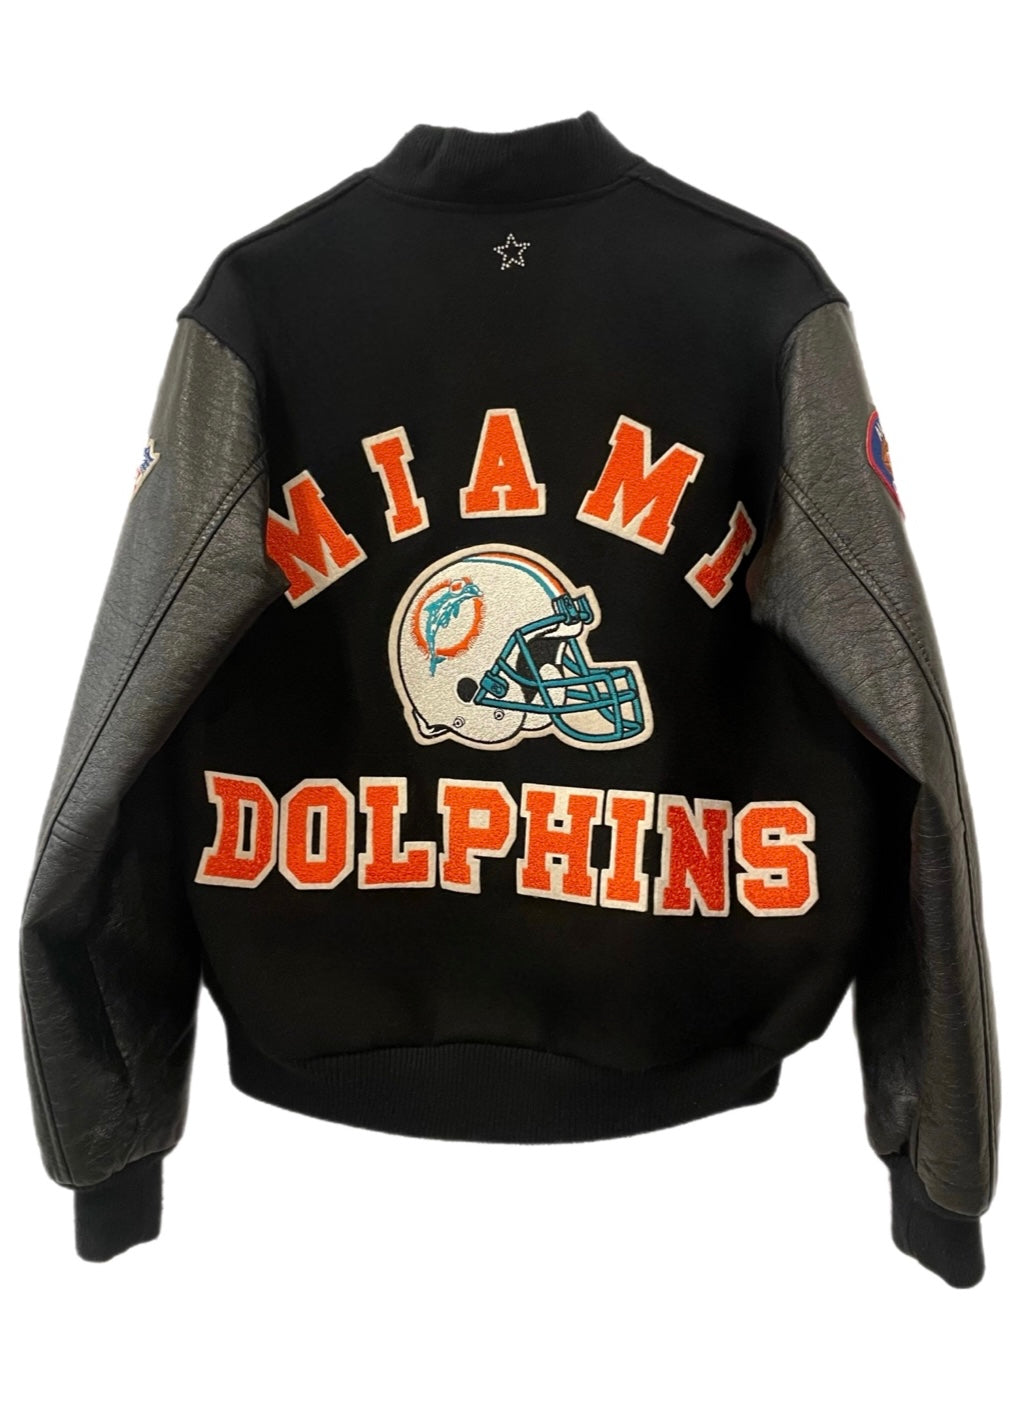 Miami Dolphins, NFL “Rare Find” One of a KIND Vintage Leather Letterman’s Jacket with Crystal Star Design, Custom Name